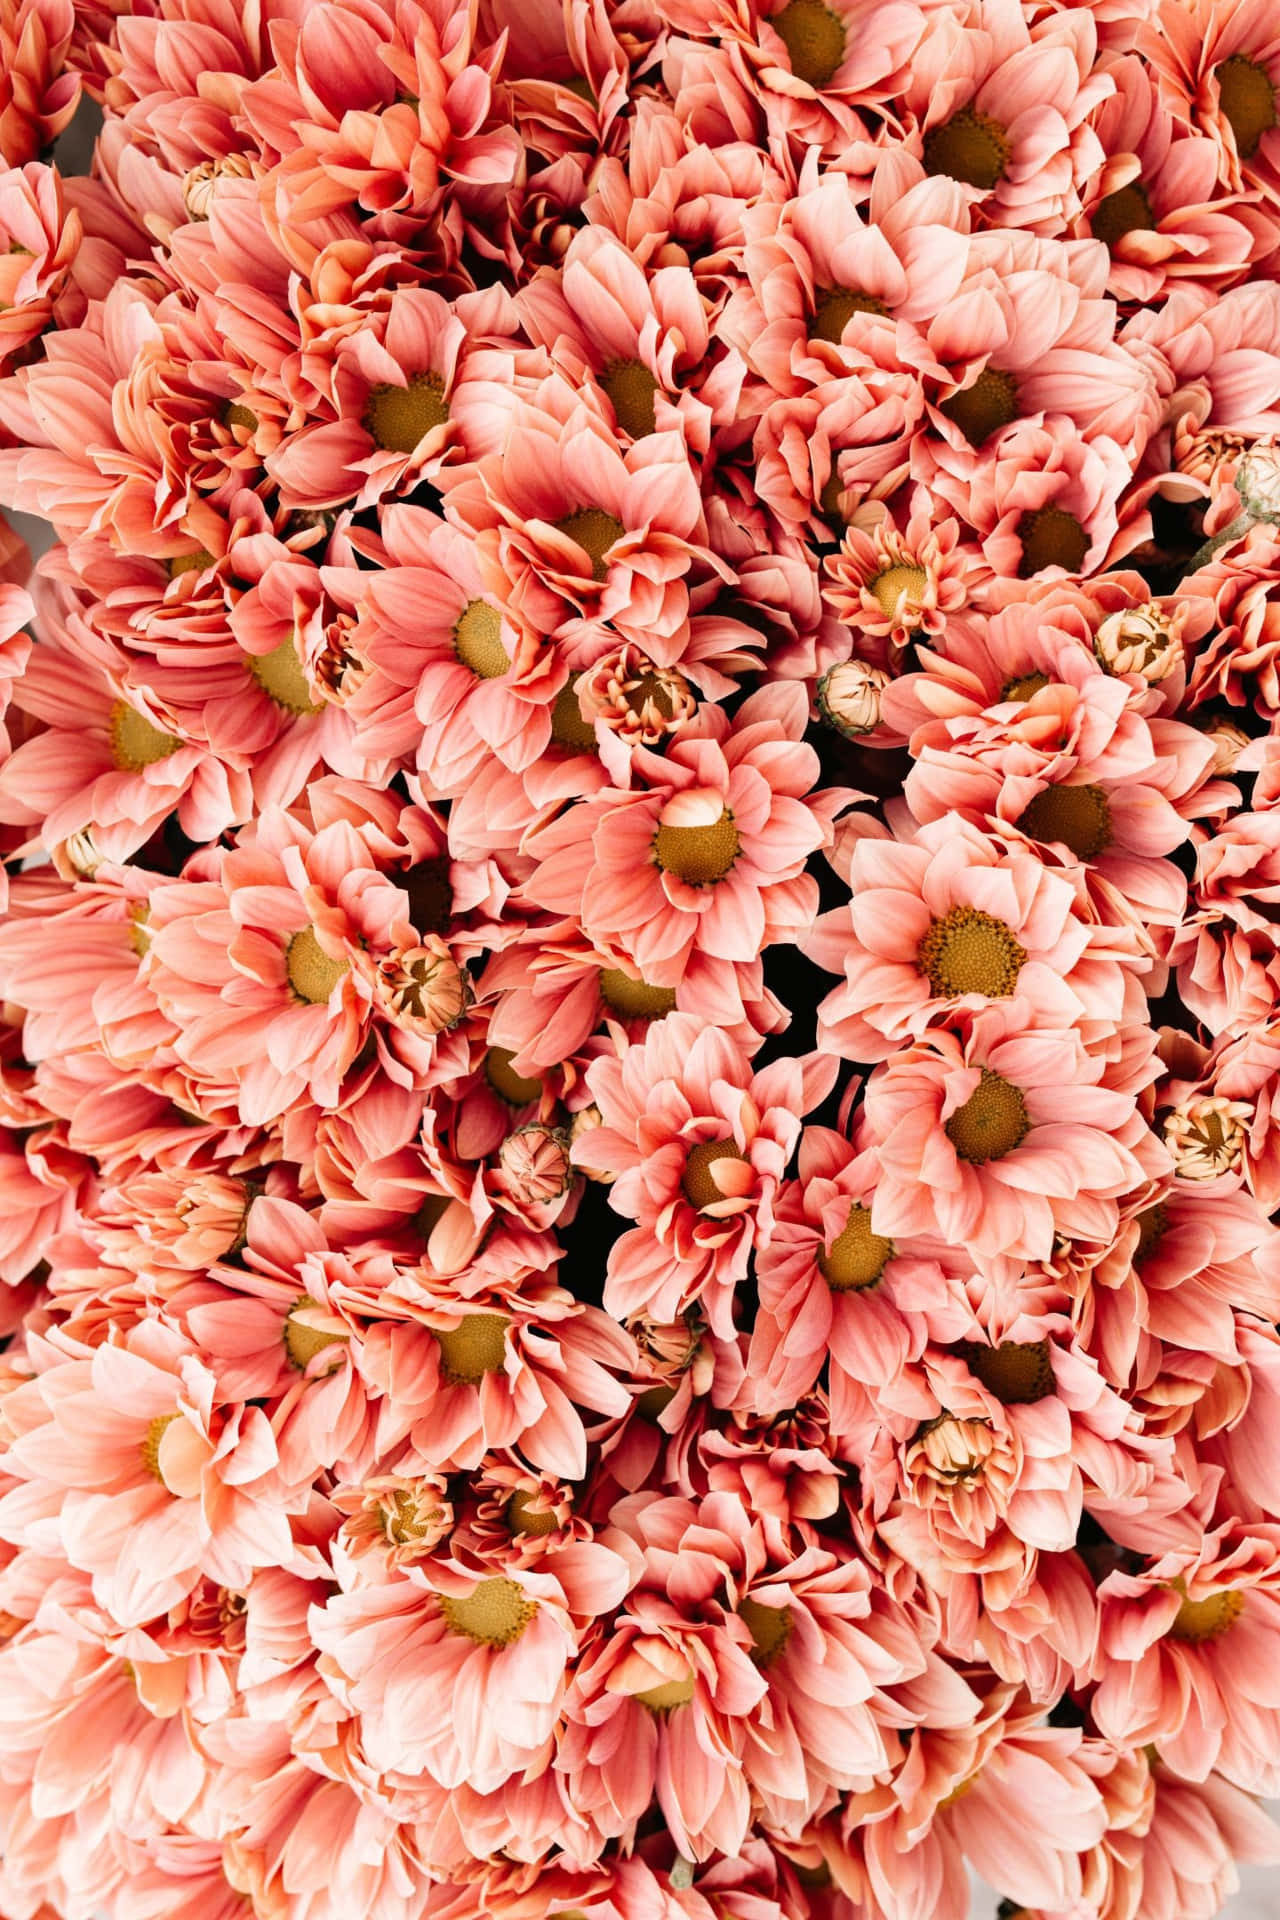 Aesthetic Floral Bunch Wallpaper